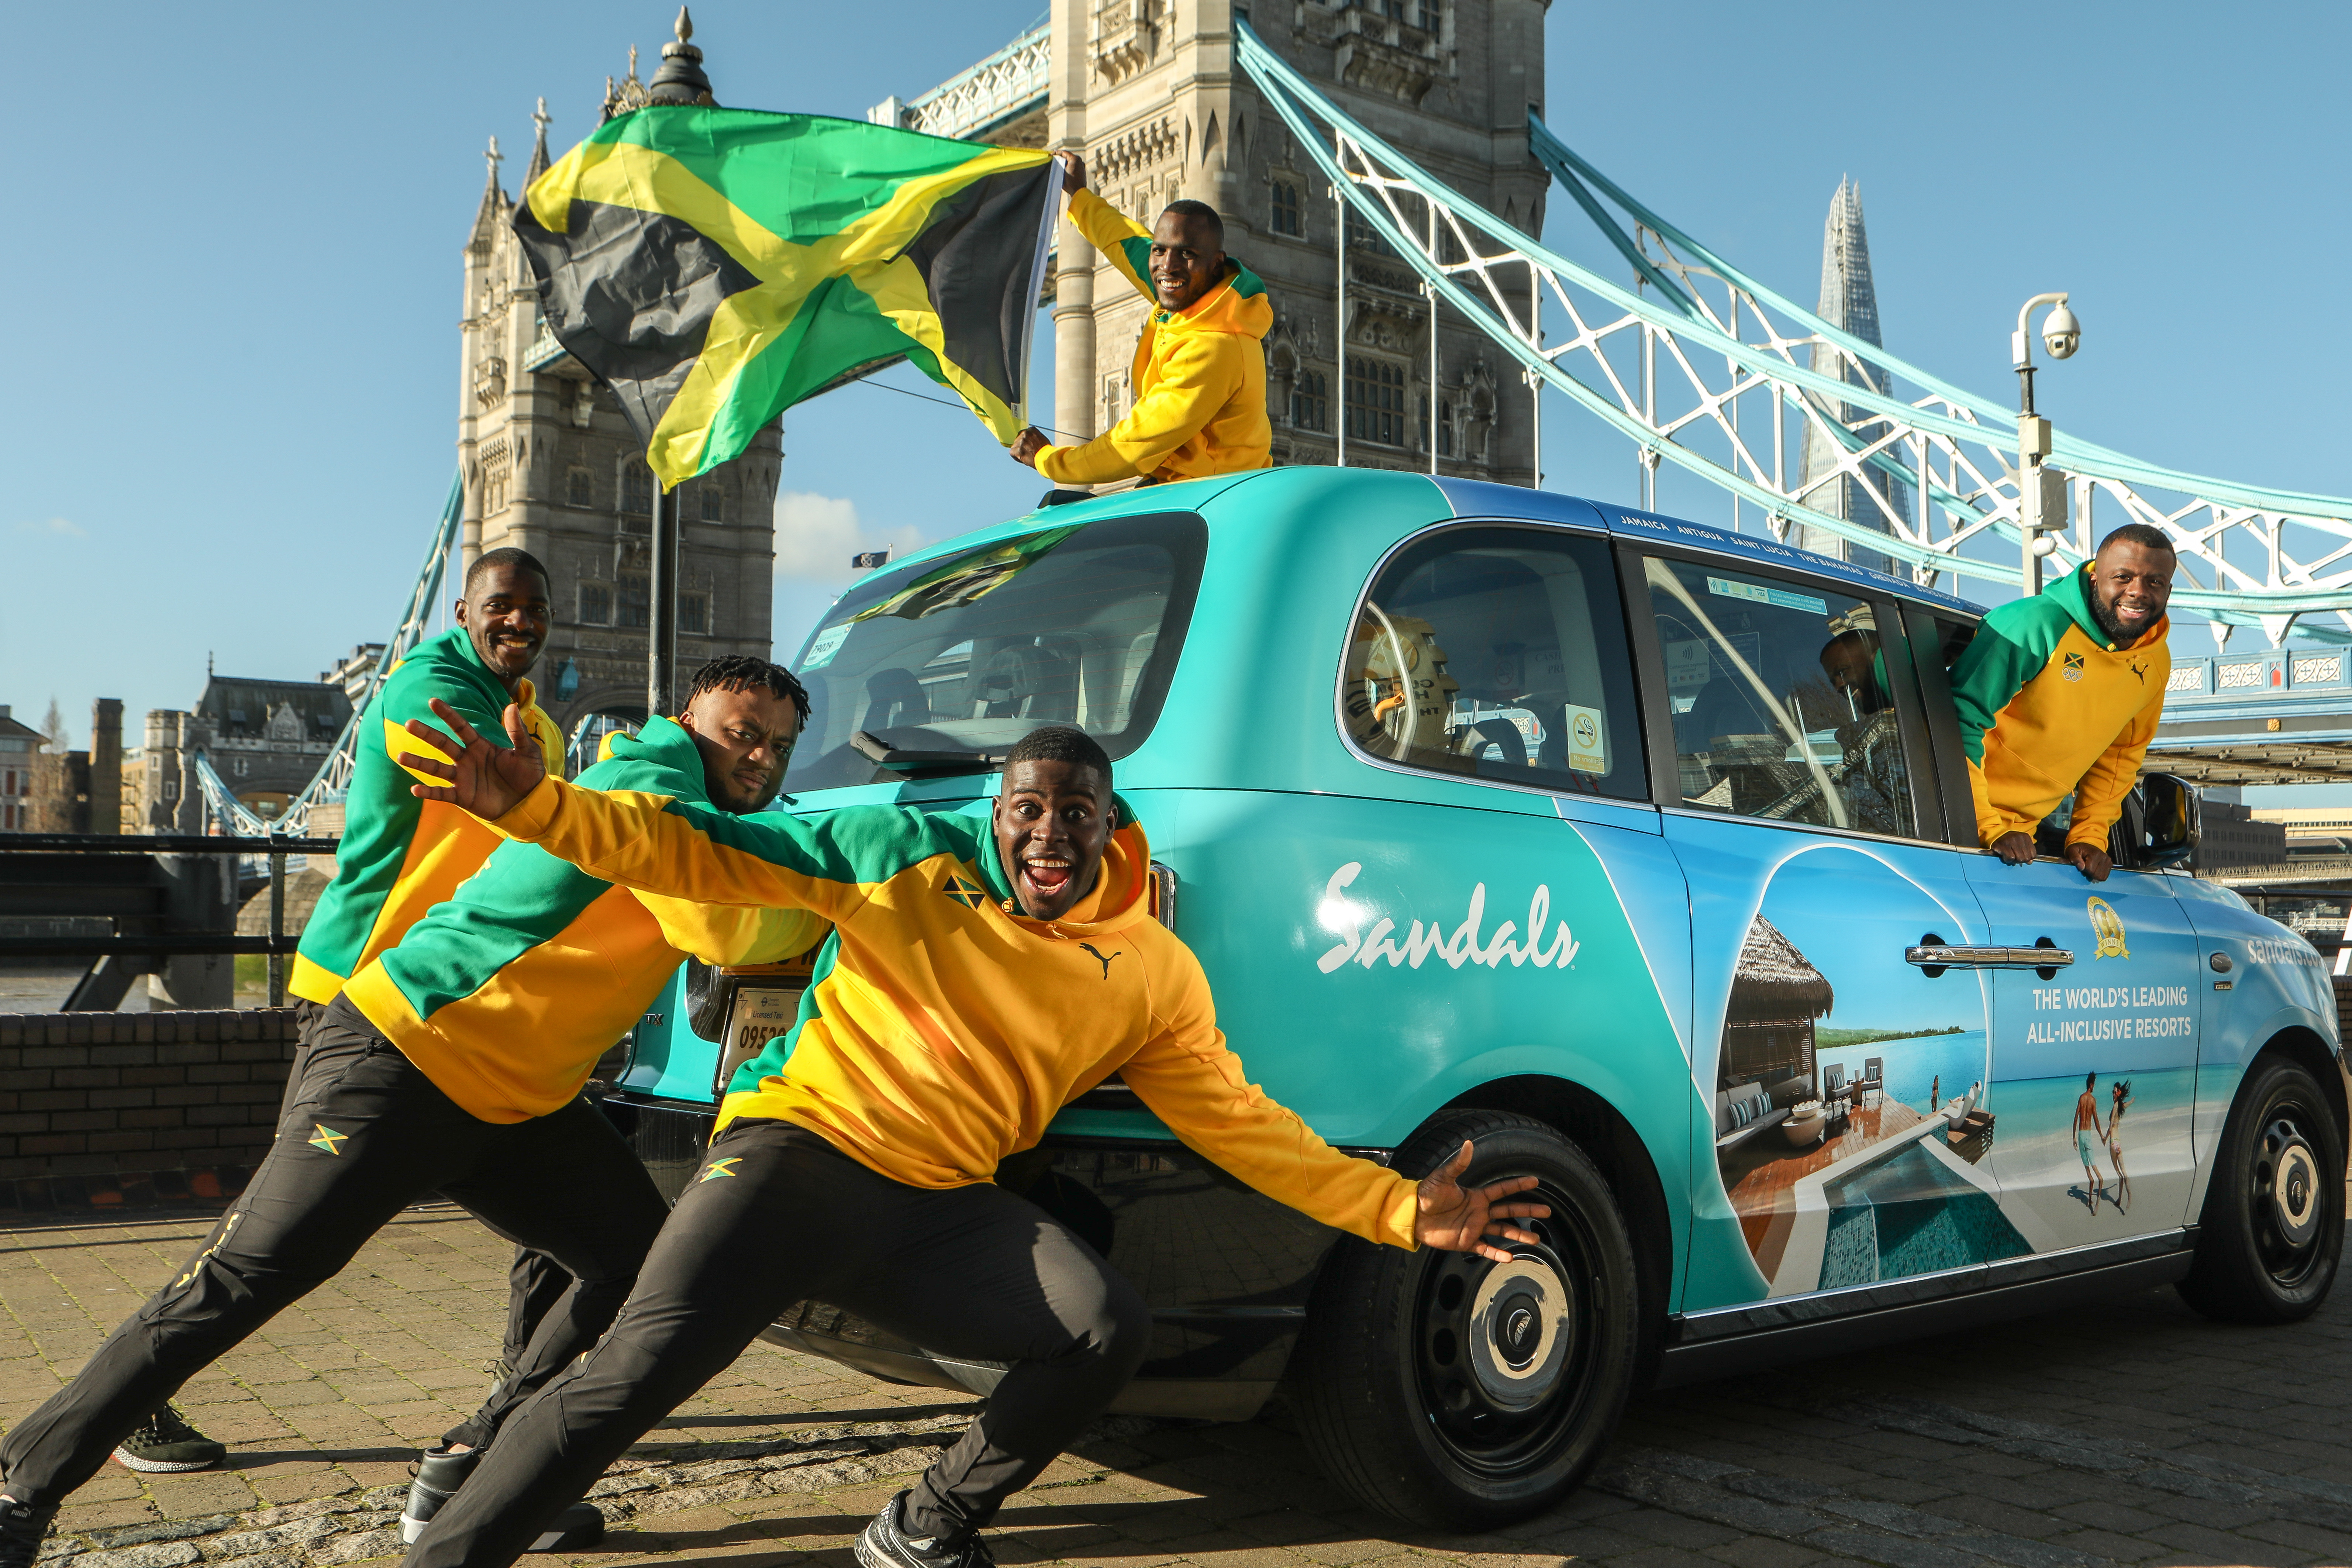 Members of the Jamaican bobsleigh team including bobsleigh pilot Shanwayne Stephens (front) and teammates (l-r) - Matthew Wekpe, Ashley Watson, Nimroy Turgott and Rolando Reid (Alex Maguire Photography/PA)